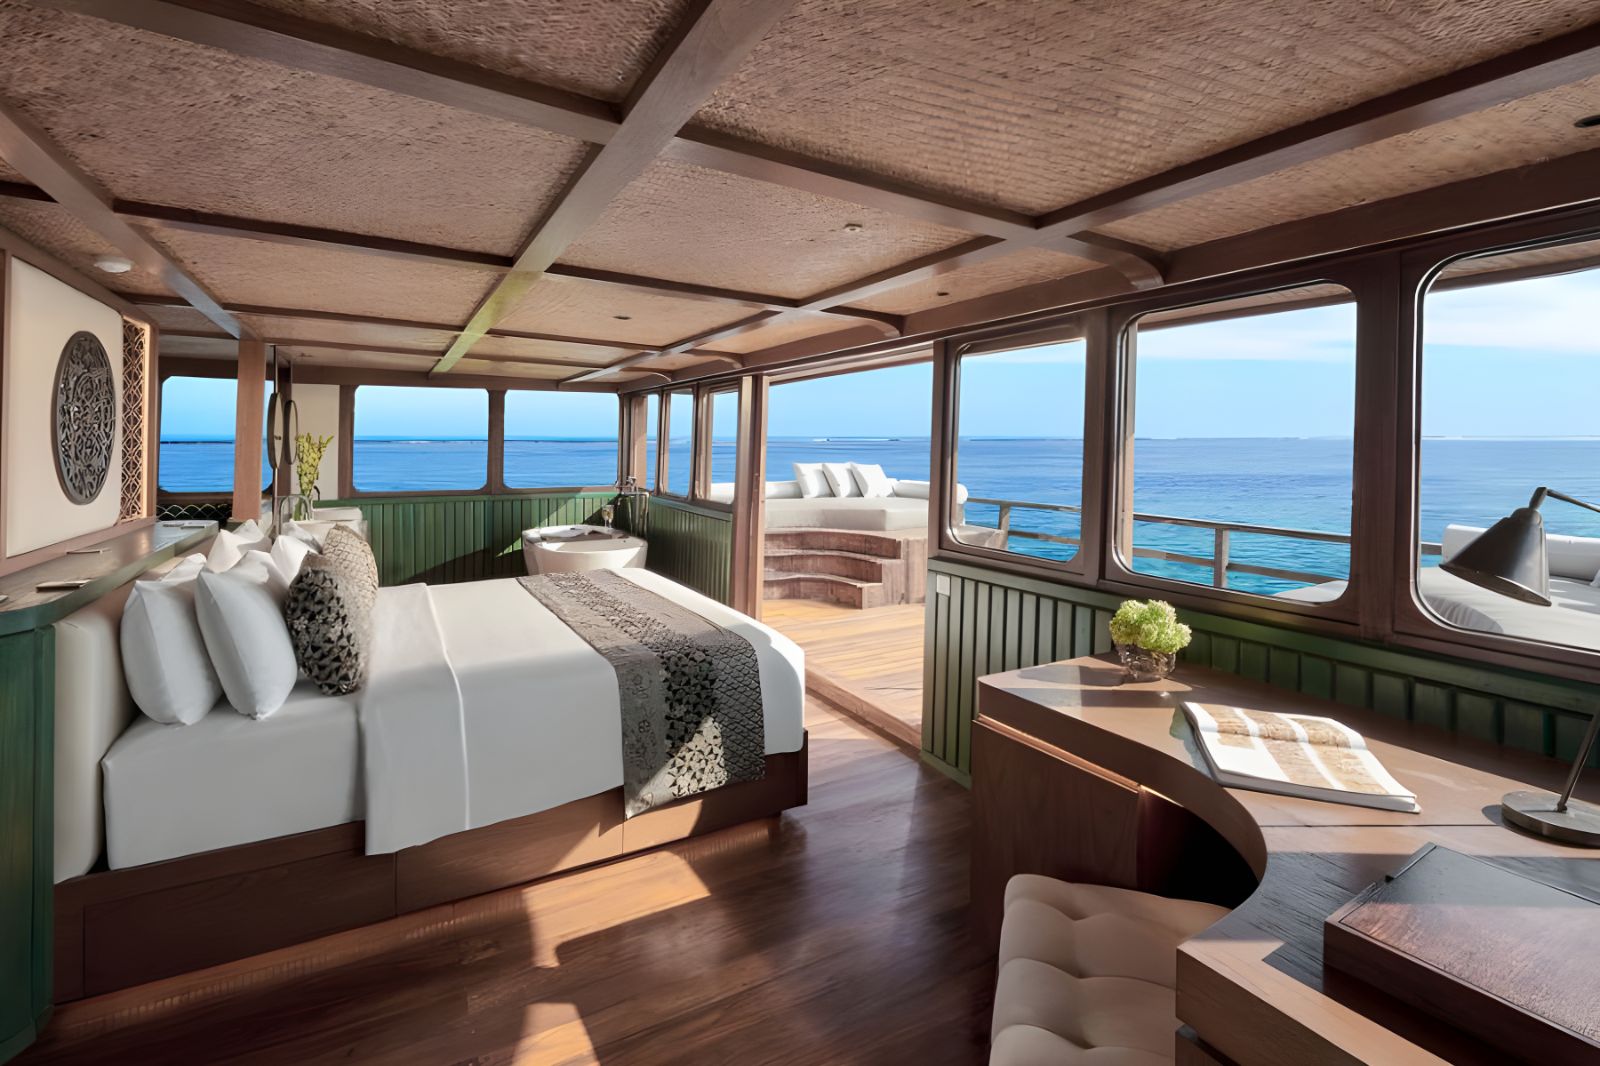 Master cabin with oceans views onboard the Samsara Samudra phinisi in Indonesia